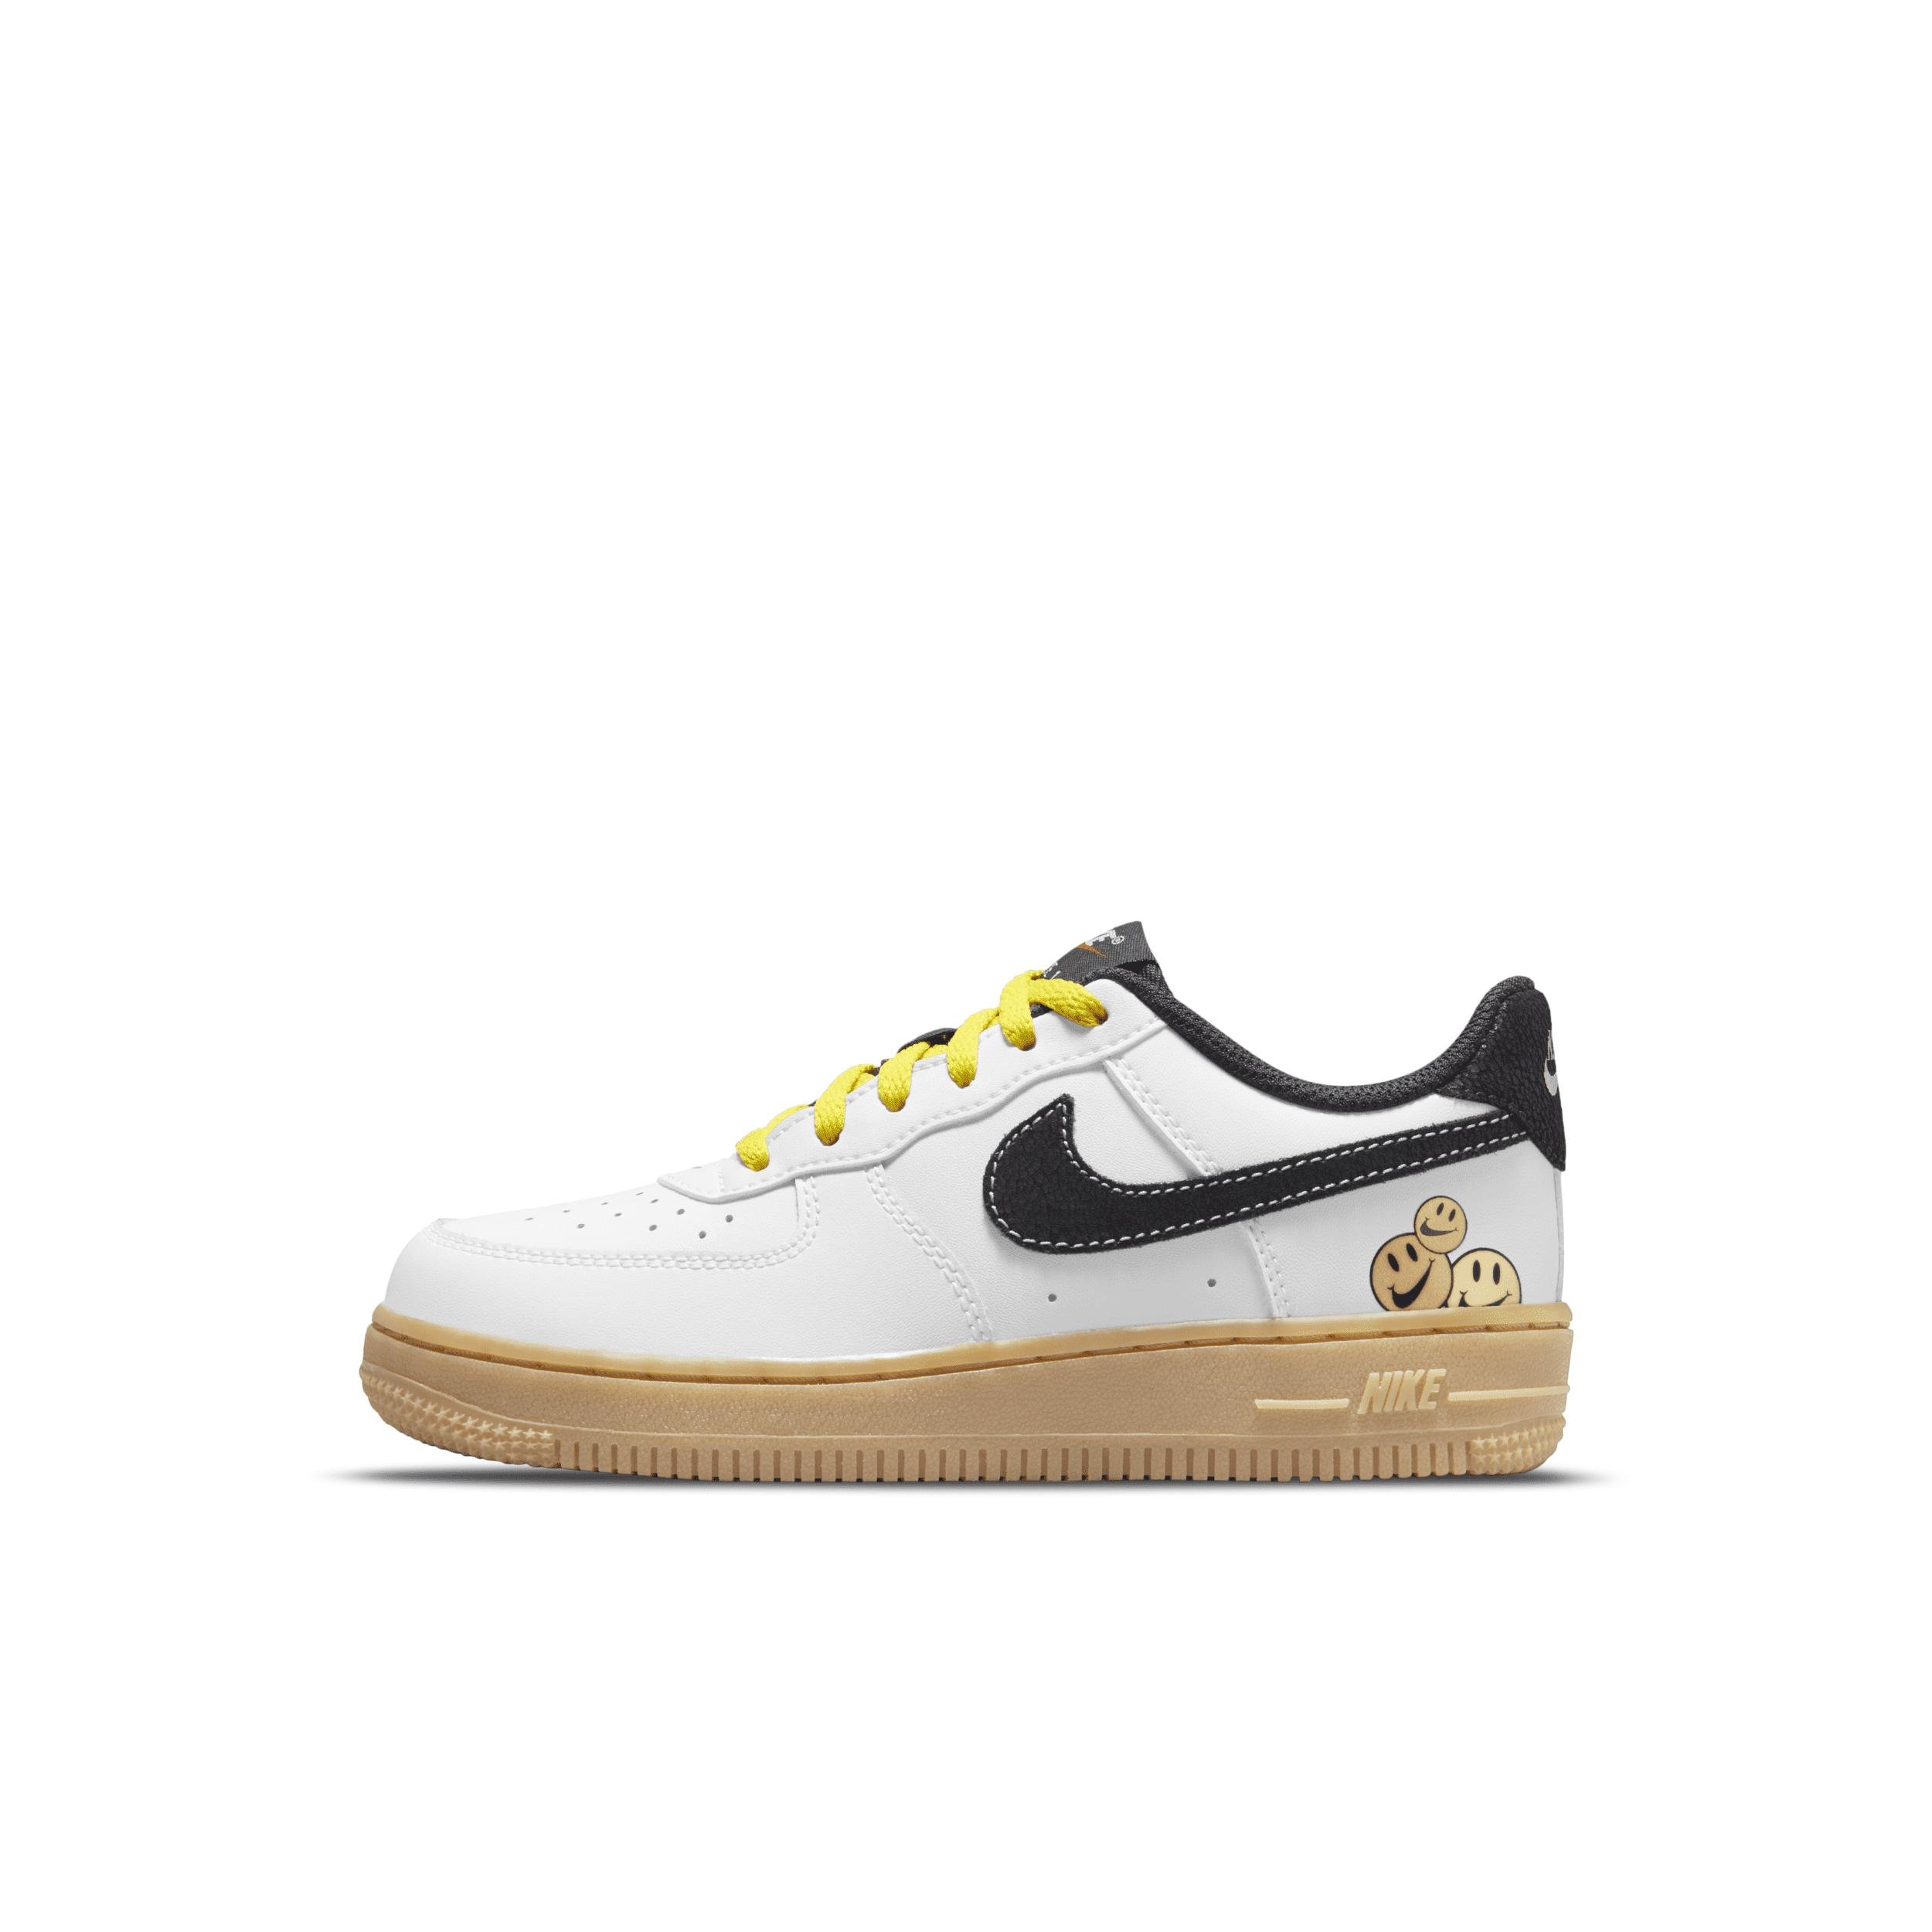 Nike Force 1 LV8 Little Kids' Shoes by NIKE